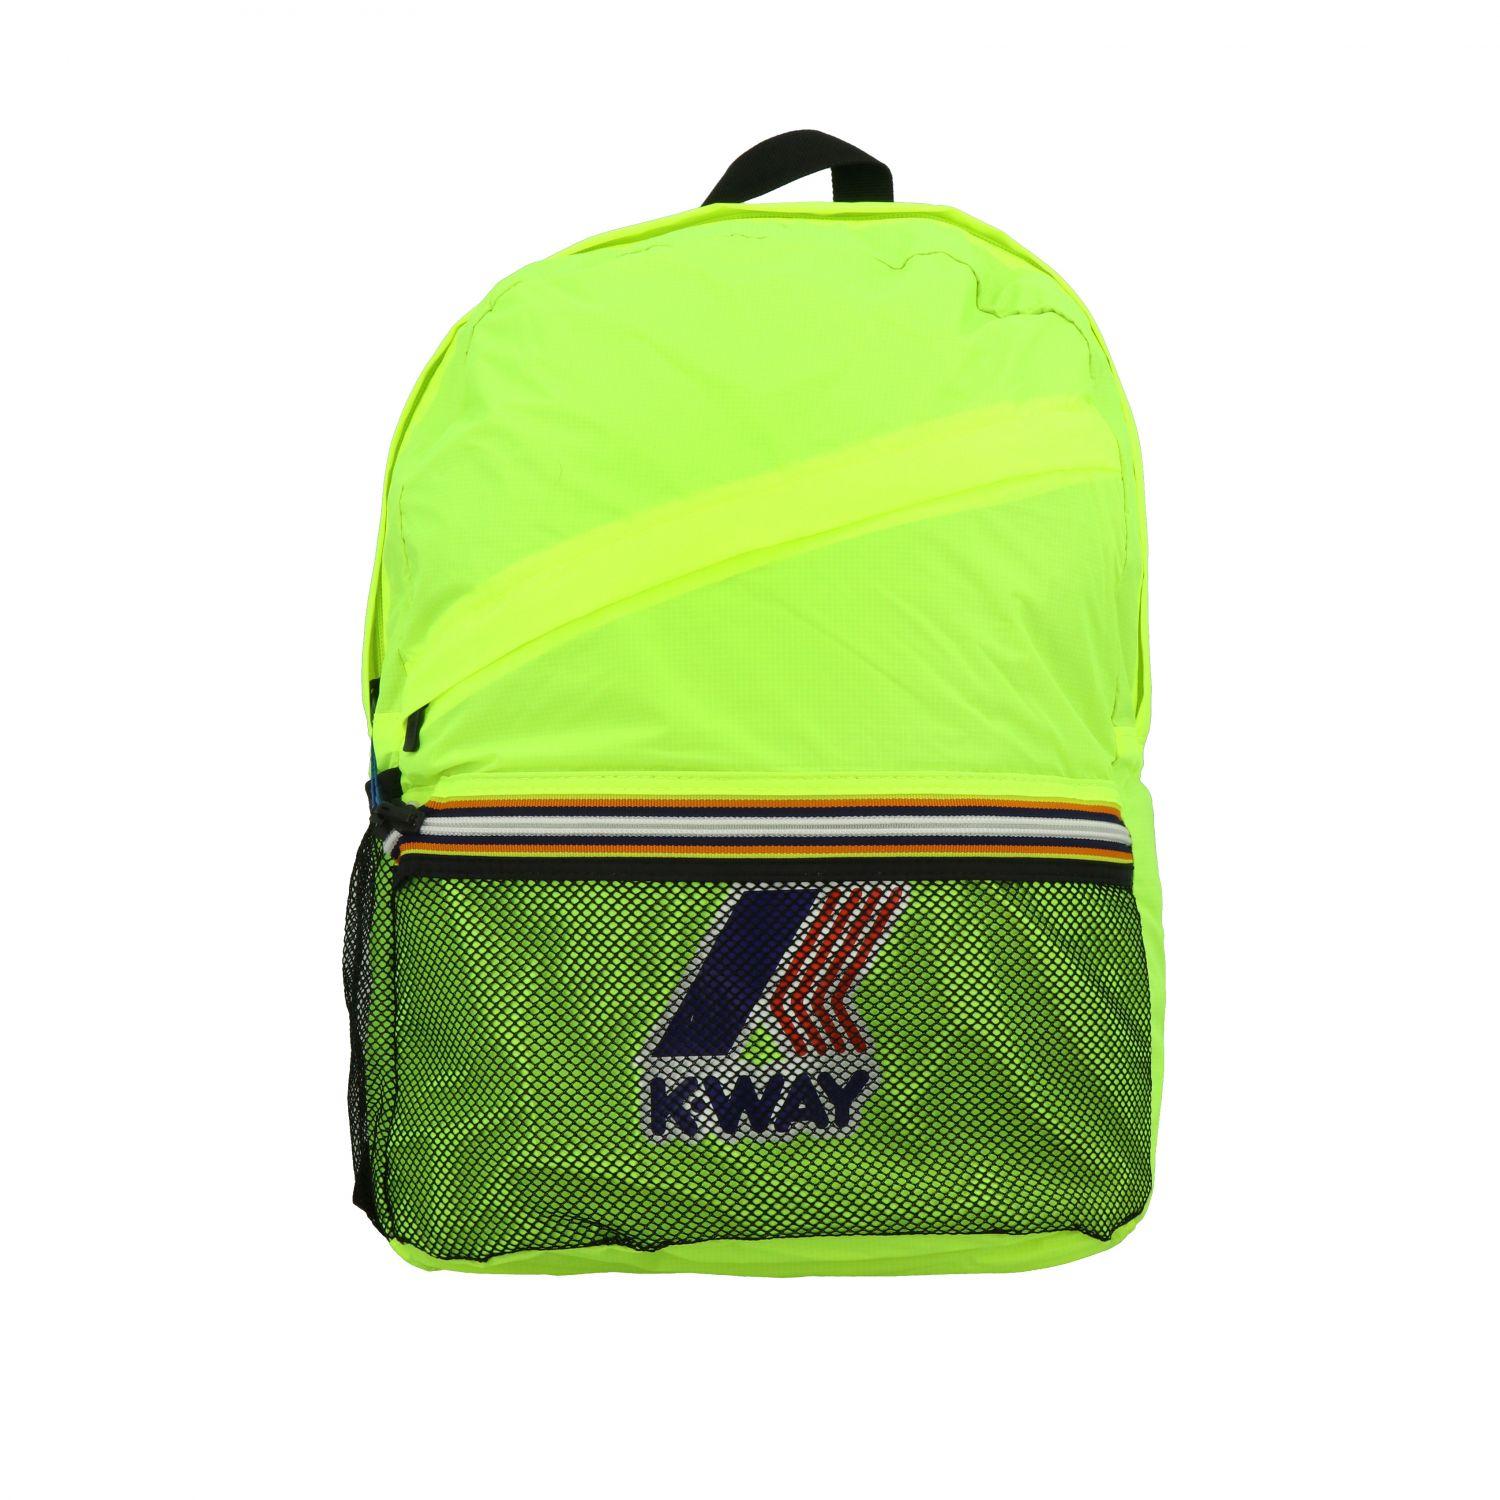 K-Way Backpack in Yellow for Men - Lyst